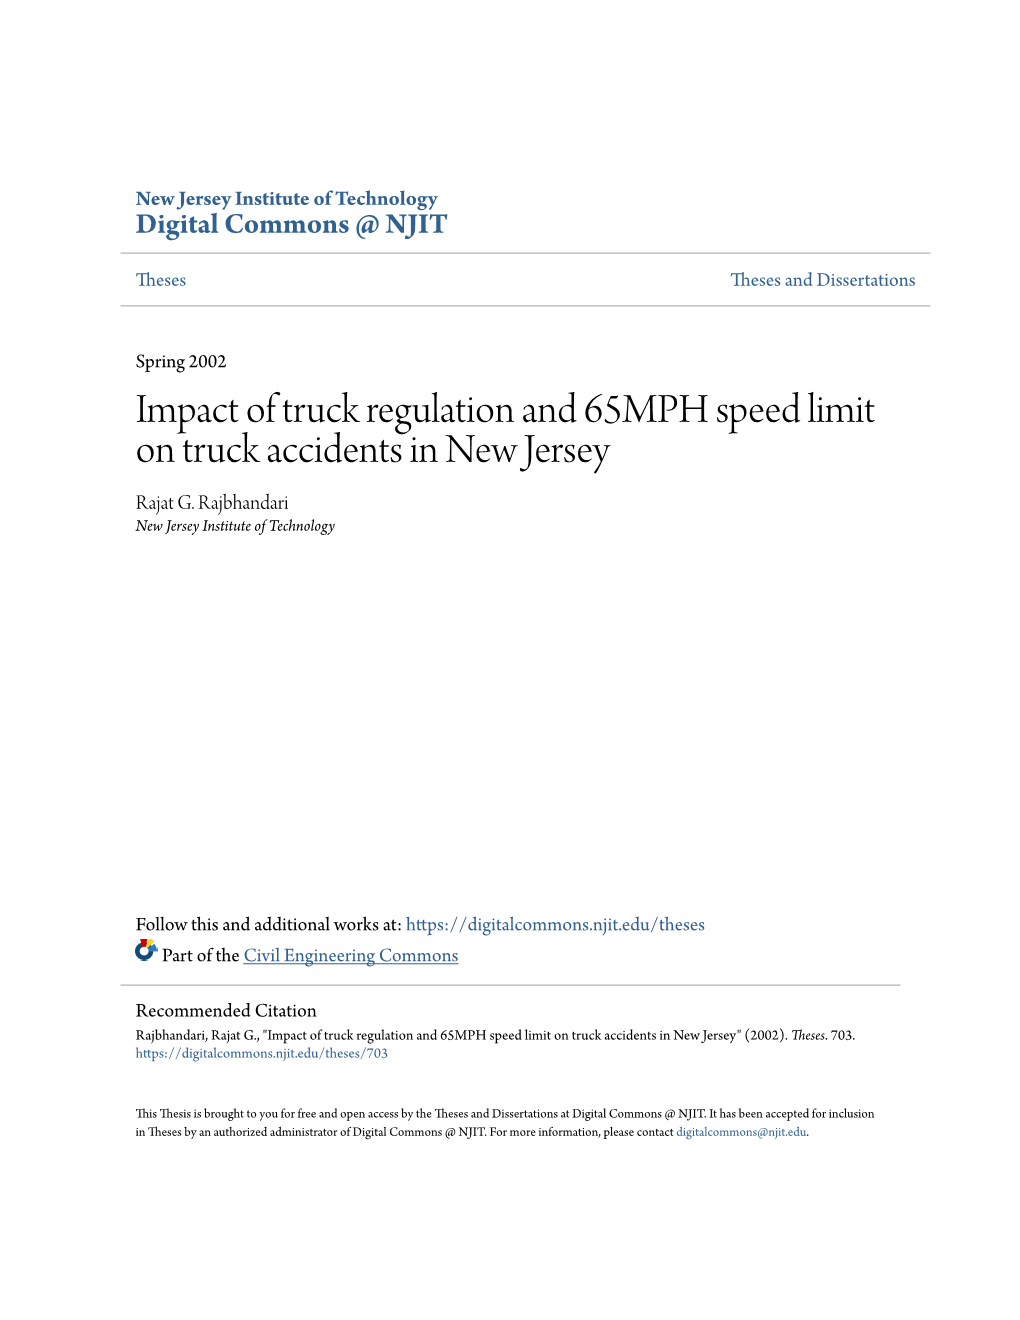 Impact of Truck Regulation and 65MPH Speed Limit on Truck Accidents in New Jersey Rajat G